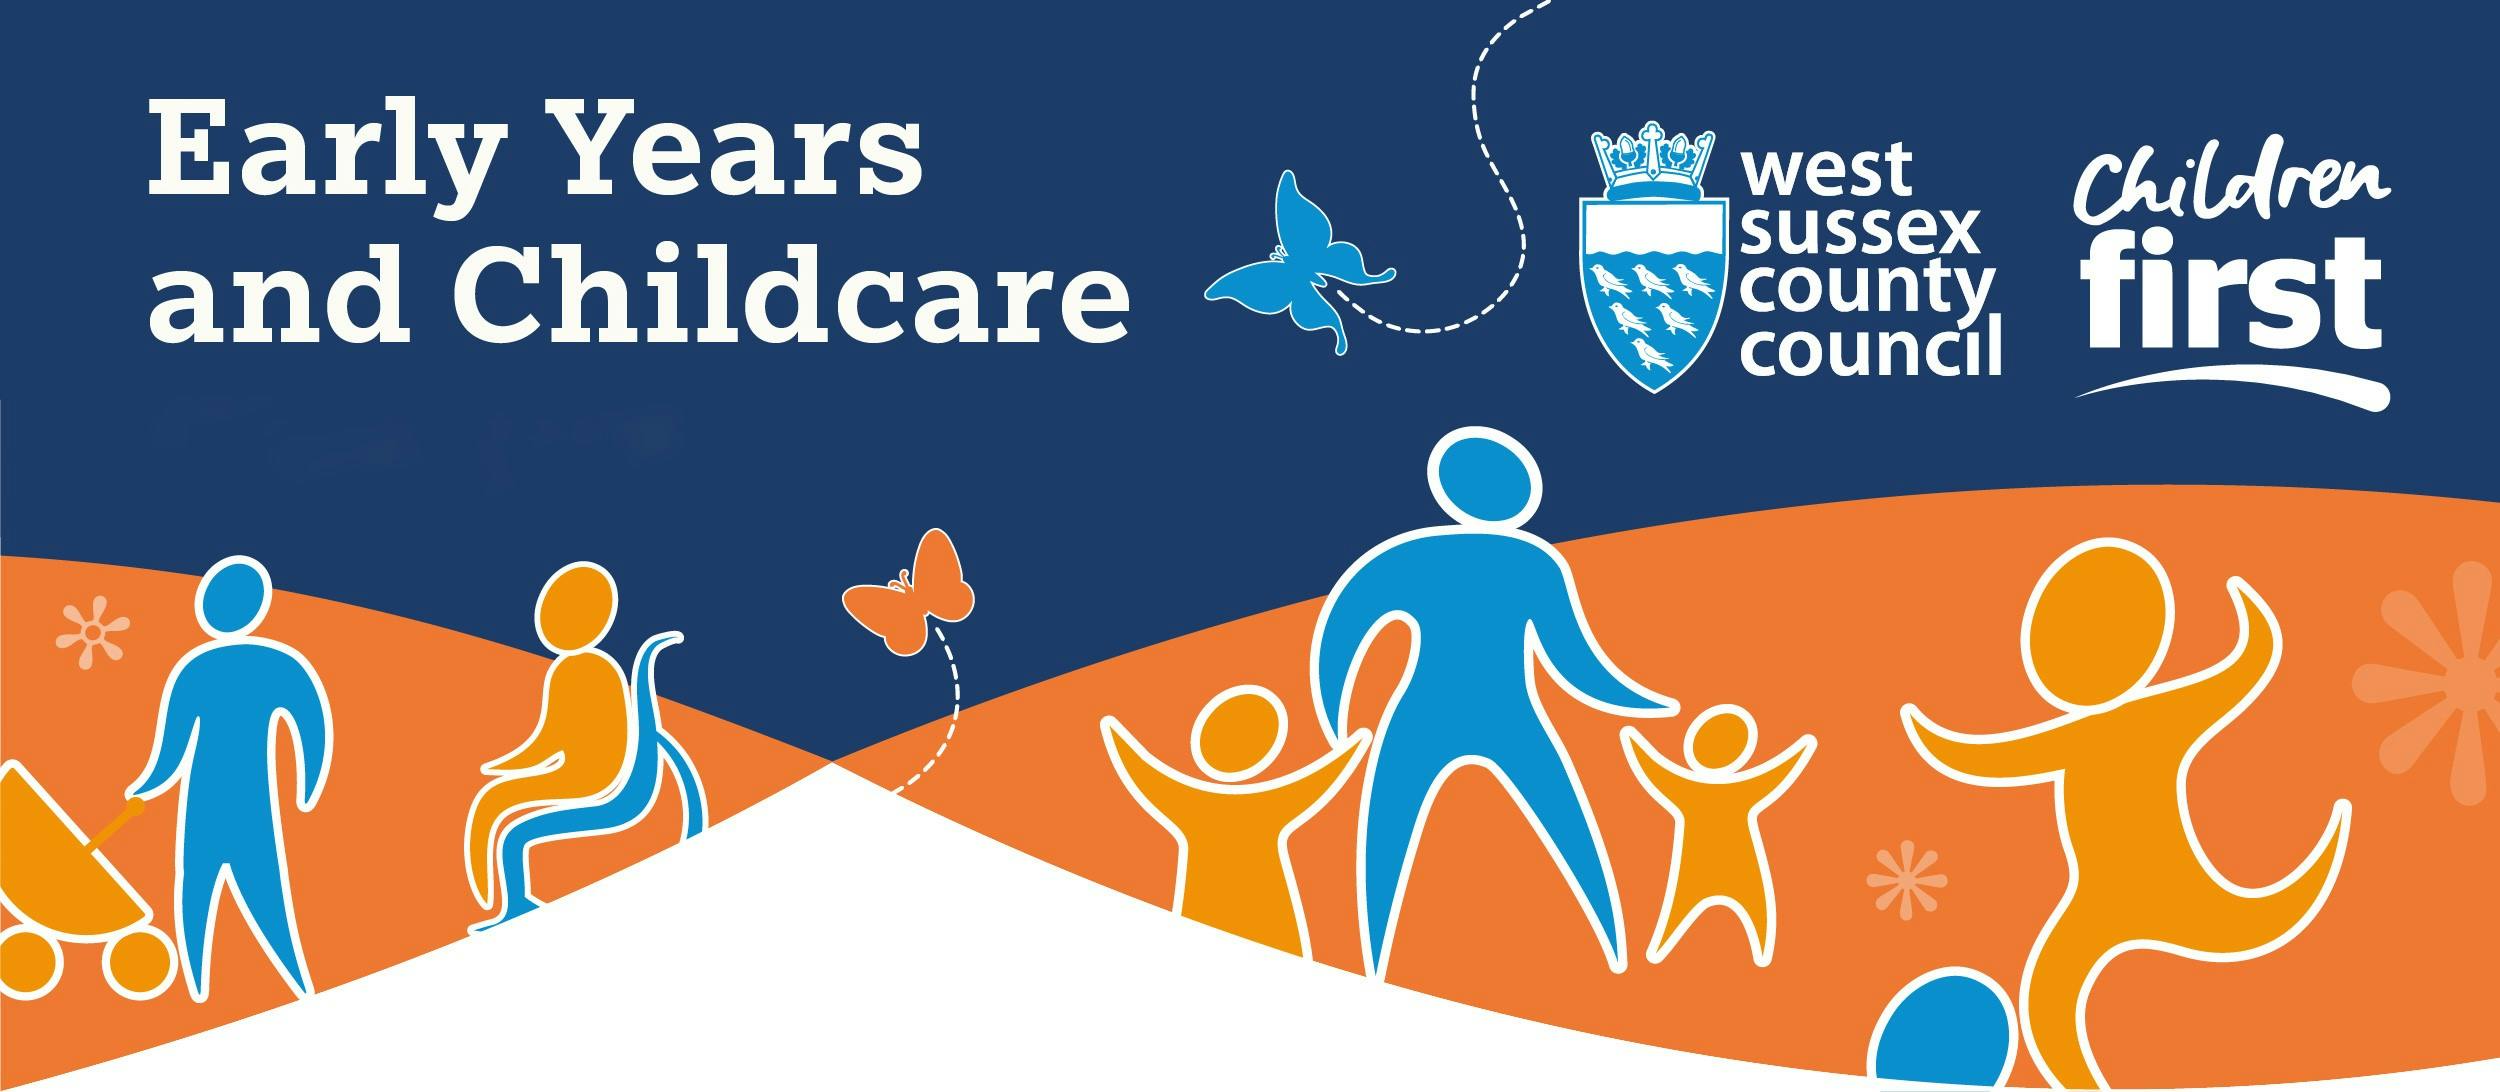 Early Years and Childcare, West Sussex County Council Children First logos shown with images of children and adults playing